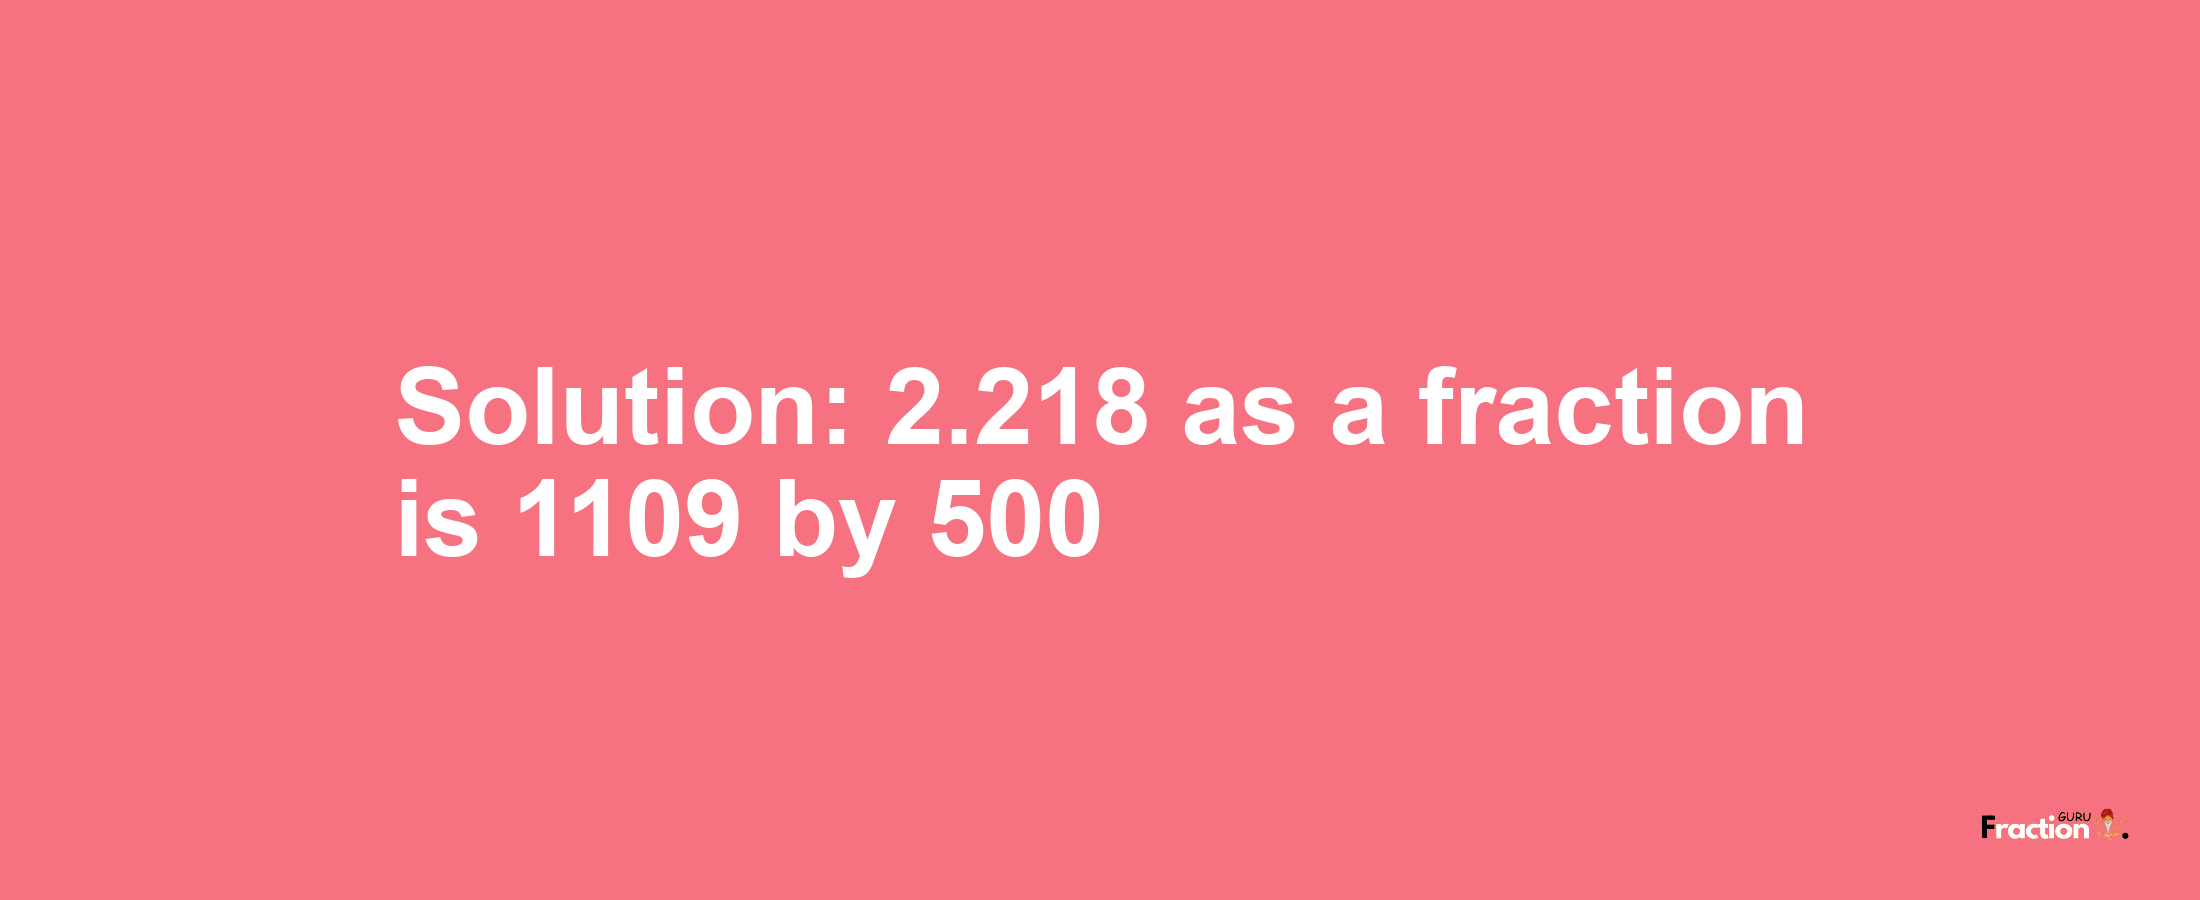 Solution:2.218 as a fraction is 1109/500